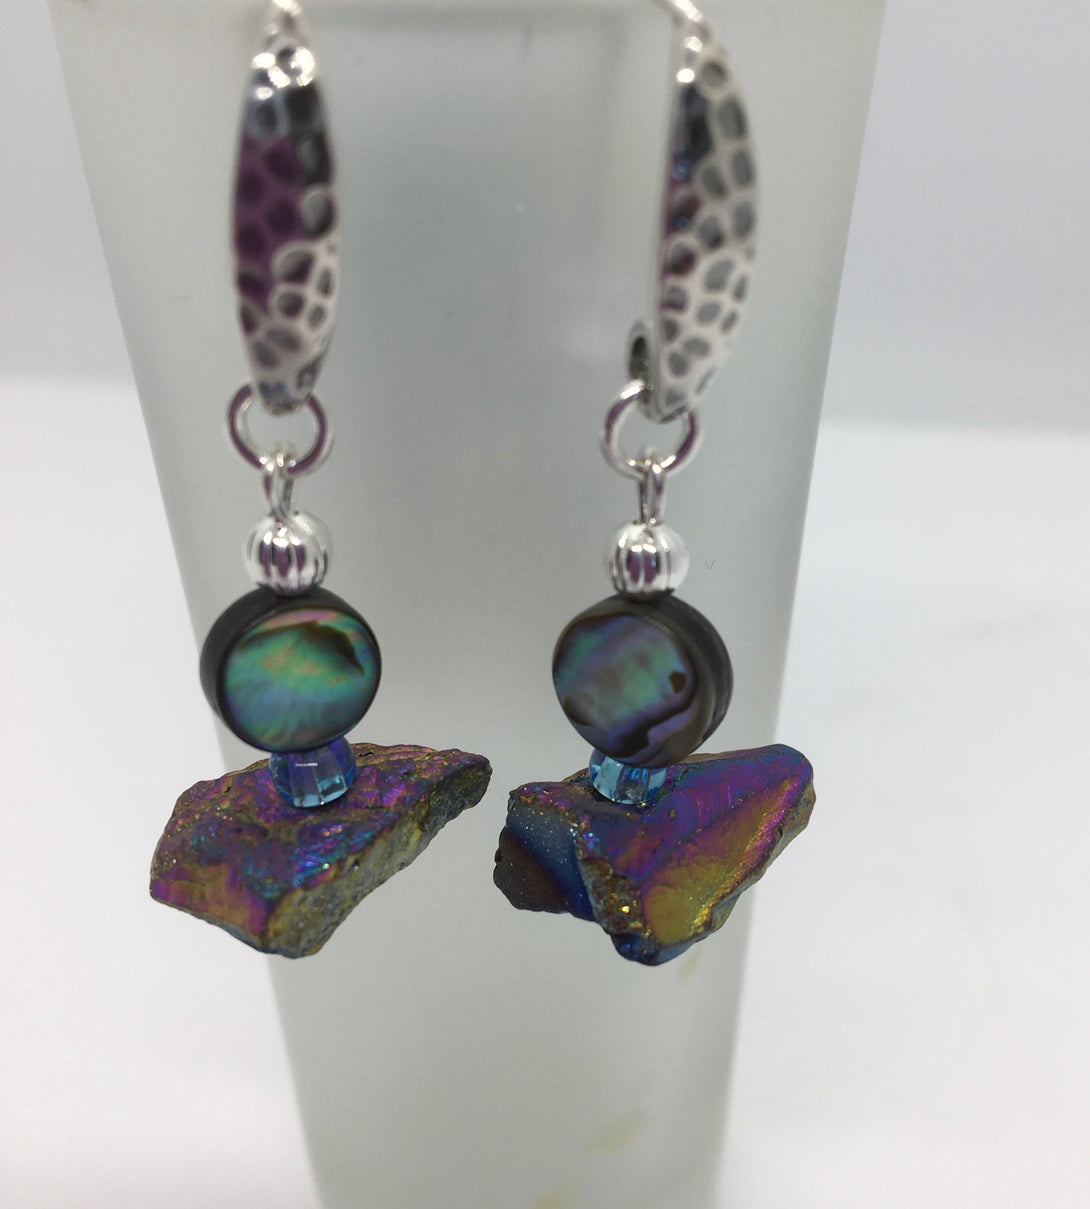 Mary Flores - Earrings - Agate & Abalone shell on sterling silver wires by Mary Flores - McMillan Arts Centre - Vancouver Island Art Gallery